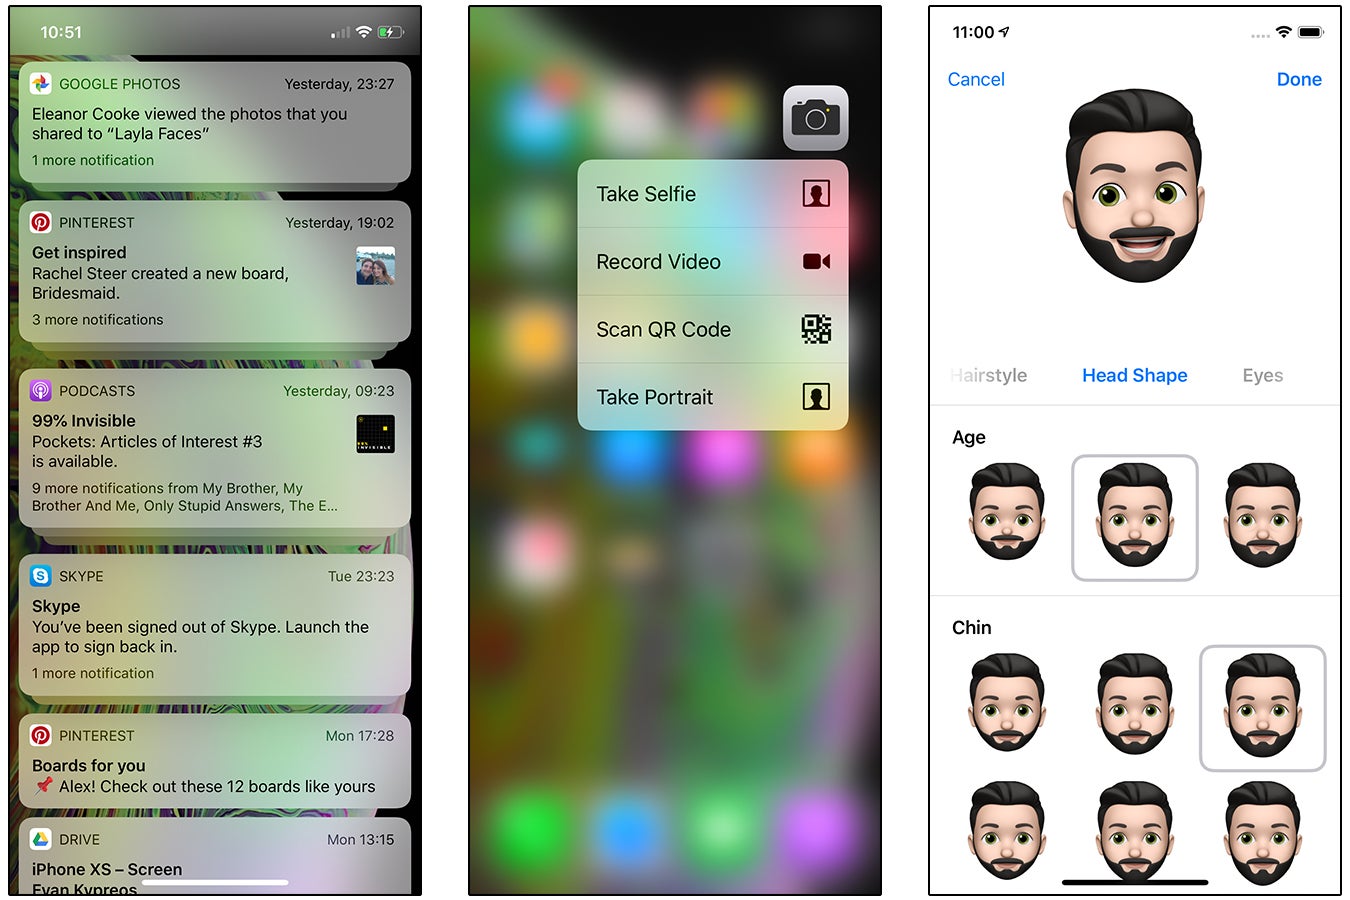 iPhone XS screenshots - Stacked notifications, 3D Touch and Memoji creation